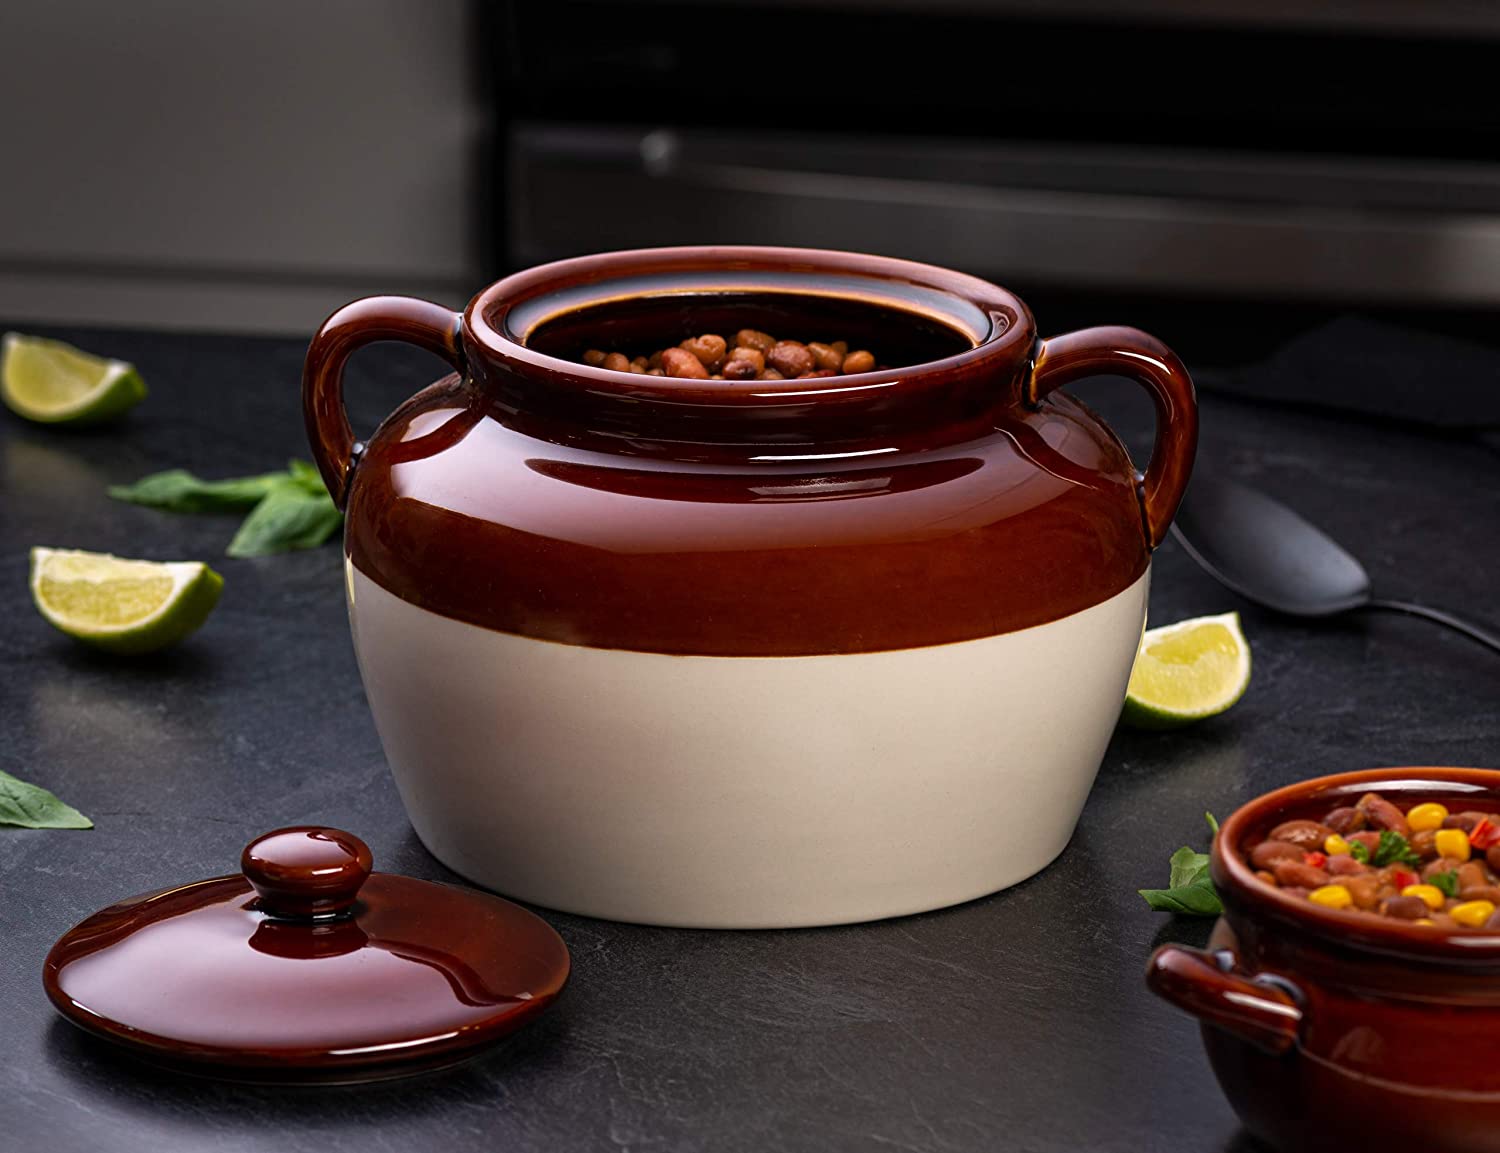 Bean Pot for Baked Beans, Chili, by Kook,